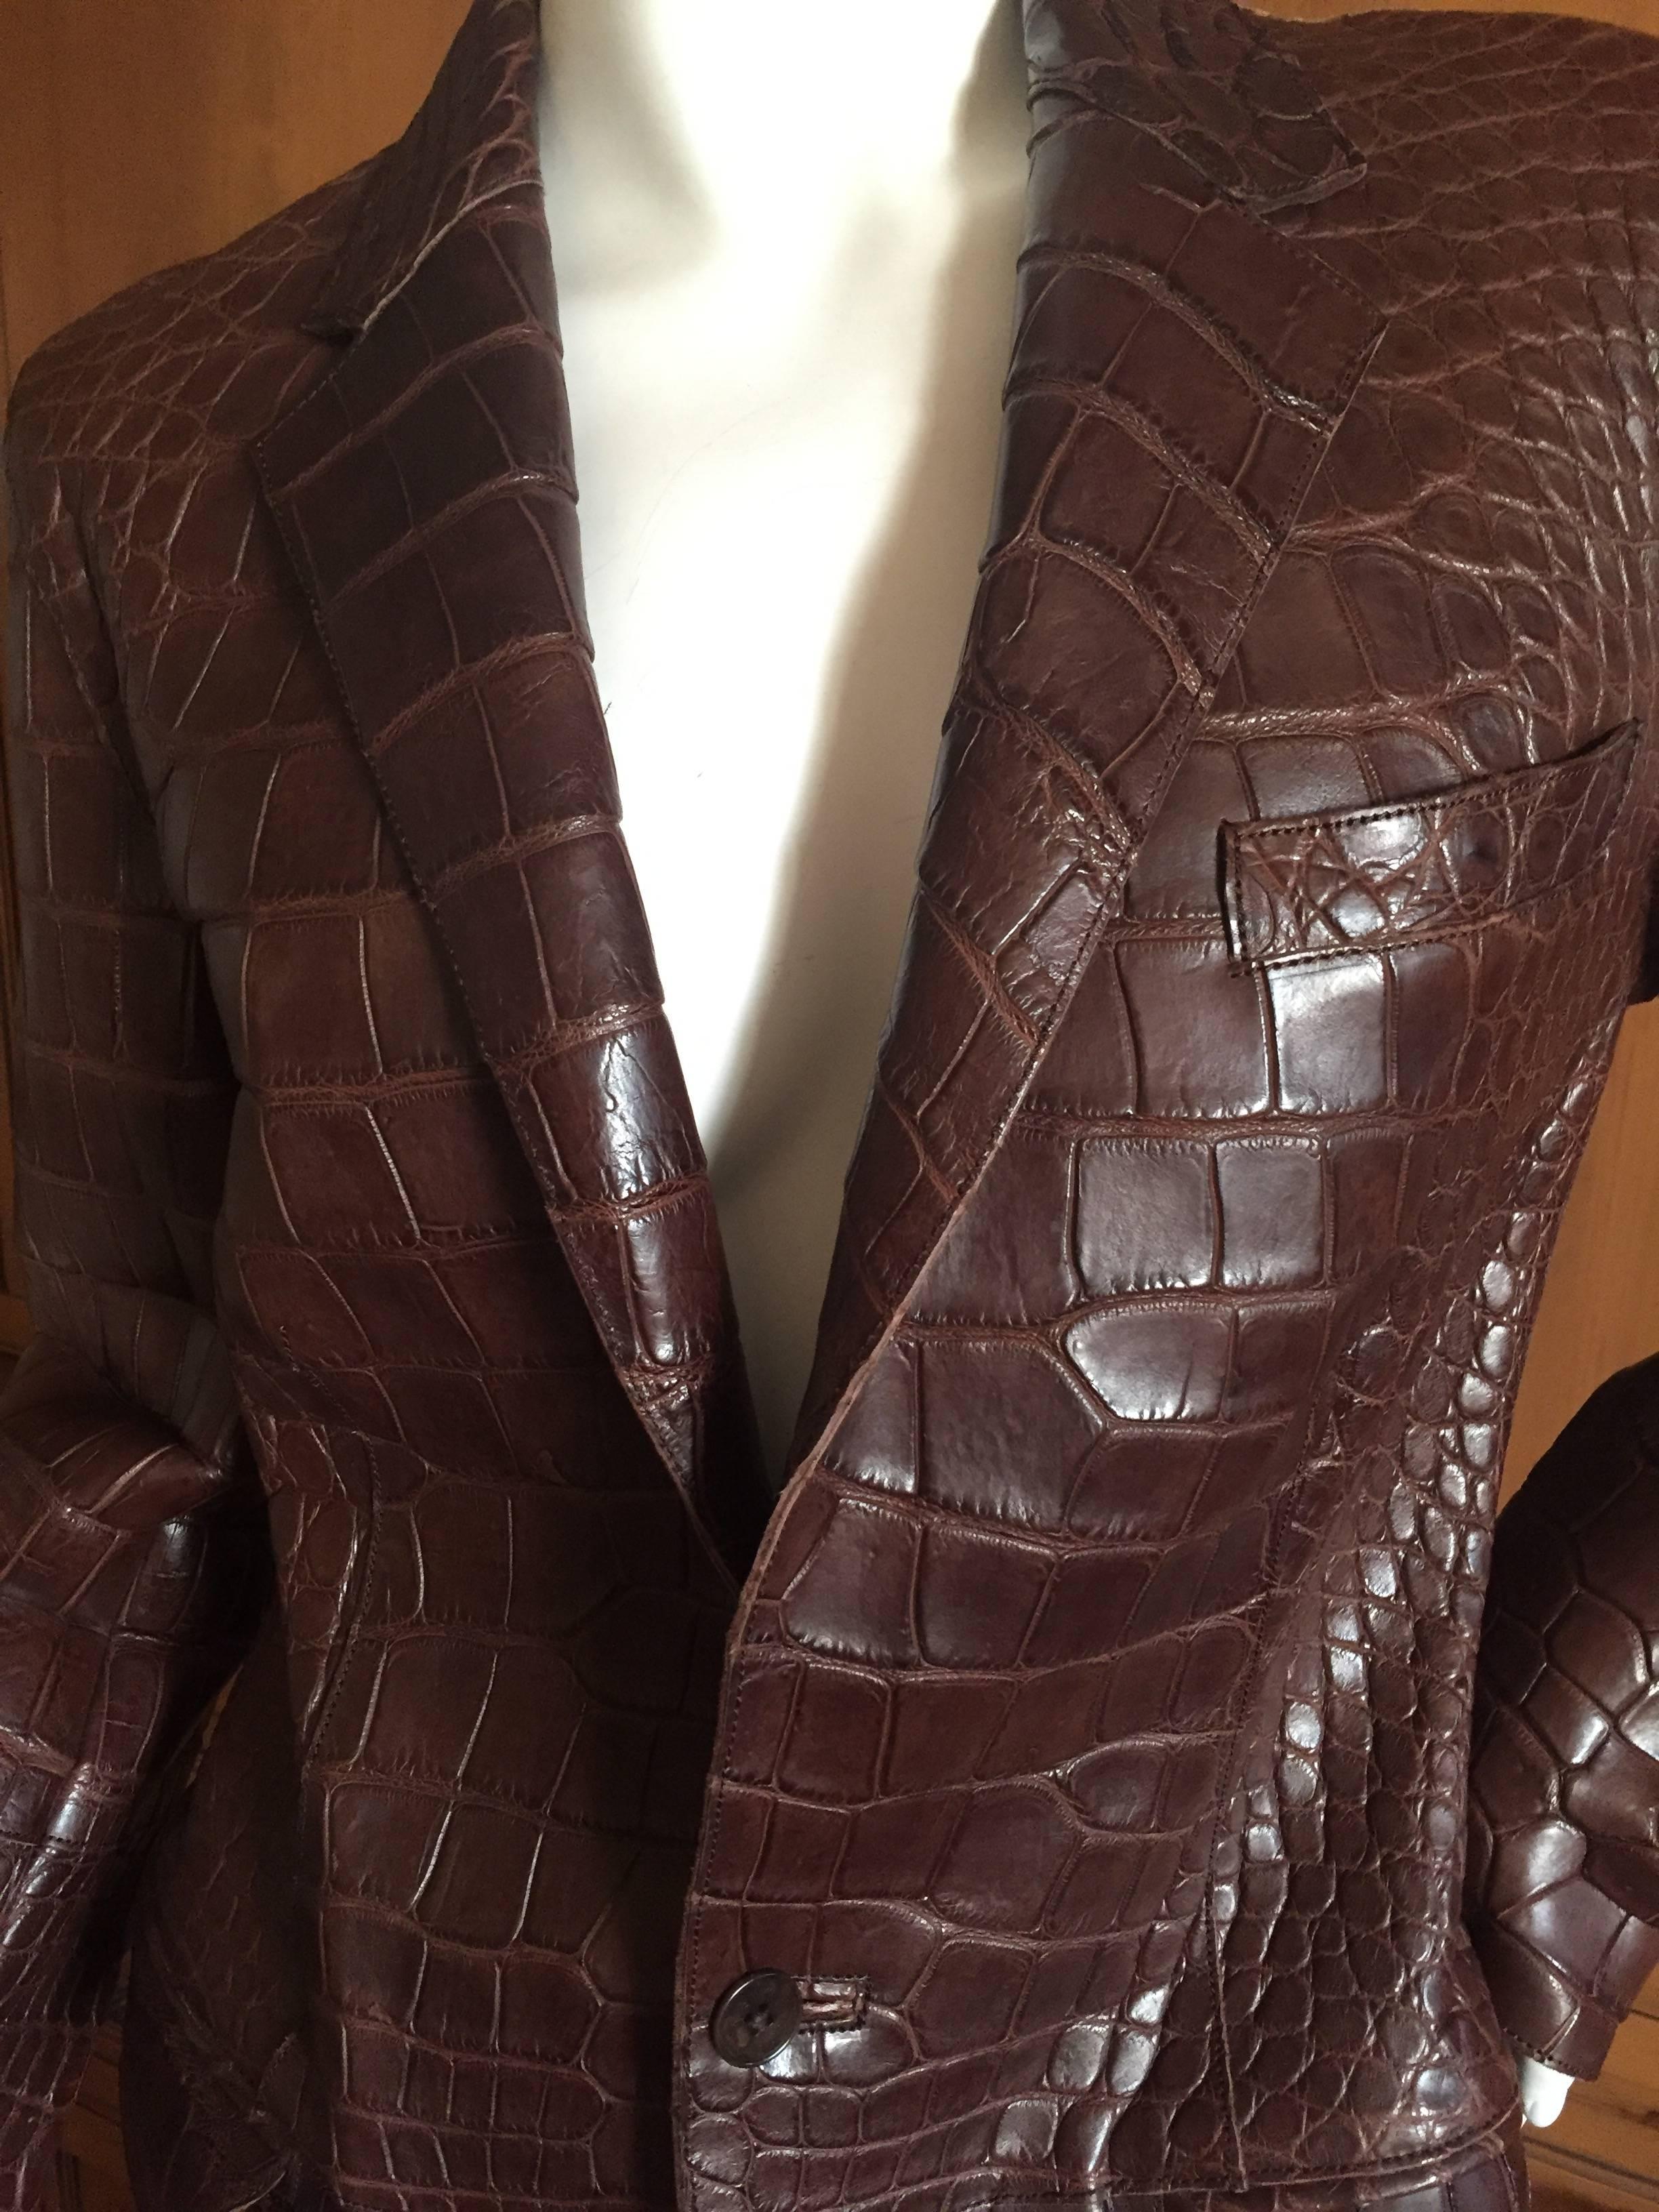 Ralph Lauren Purple Label Vintage Crocodile Embossed Leather Jacket
Size 10
This looks like genuine crocodile, however the label reads leather.
The sleeves are very long, I'm not certain if they were designed to rollup, but the sleevs are